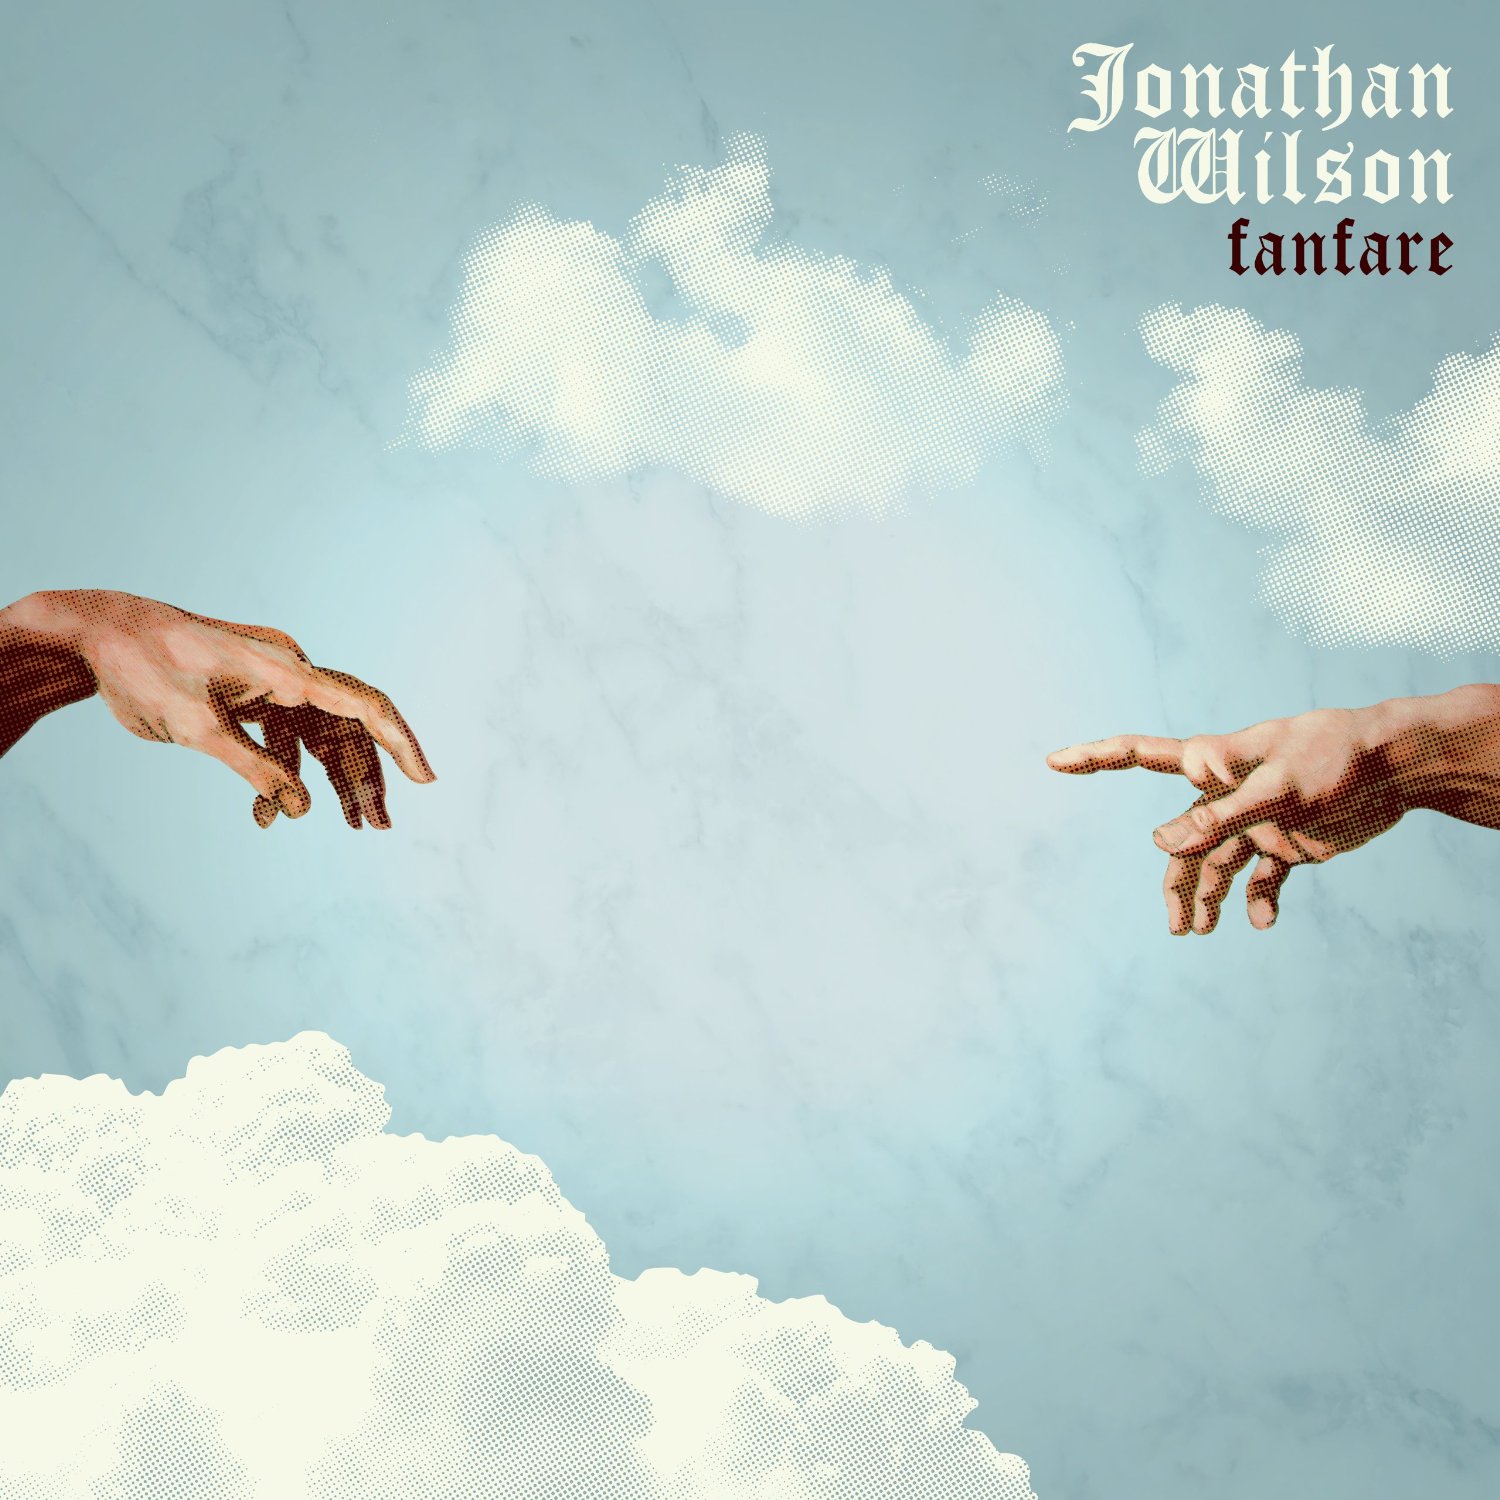 News Added Aug 17, 2013 october 2013 will see the release of second album from jonathan wilson, the follow up to 2011's critically acclaimed "gentle spirit". on the evidence of 'dear friend' the album continues with the 70's west sound of the previous album. Featuring contributions from Graham Nash, David Crosby, Jackson Browne, Josh Tillman […]